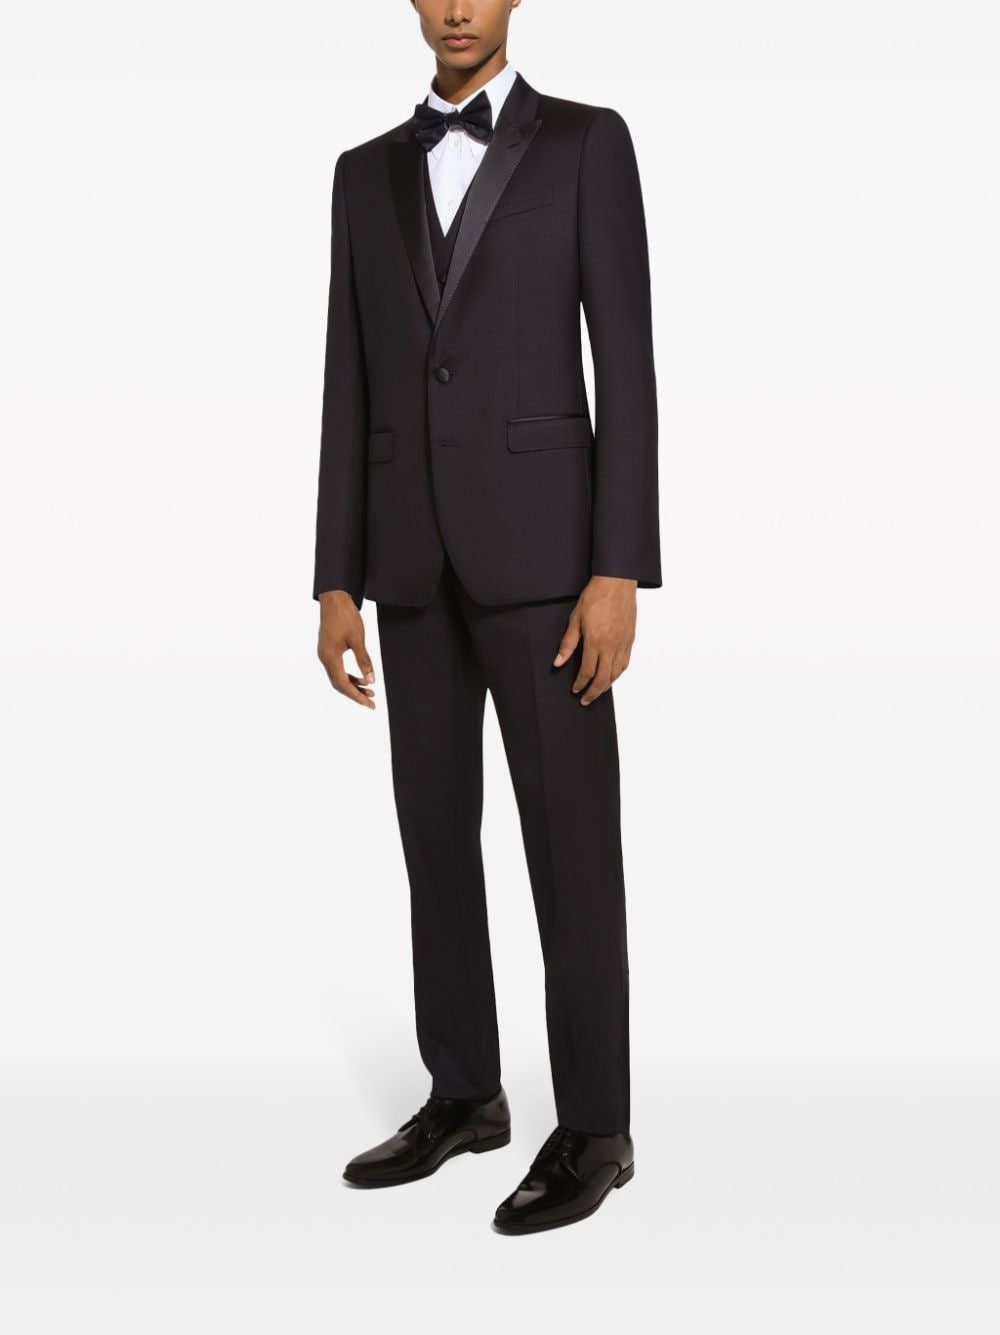 Image 2 of Dolce & Gabbana contrasting lapels two-piece suit